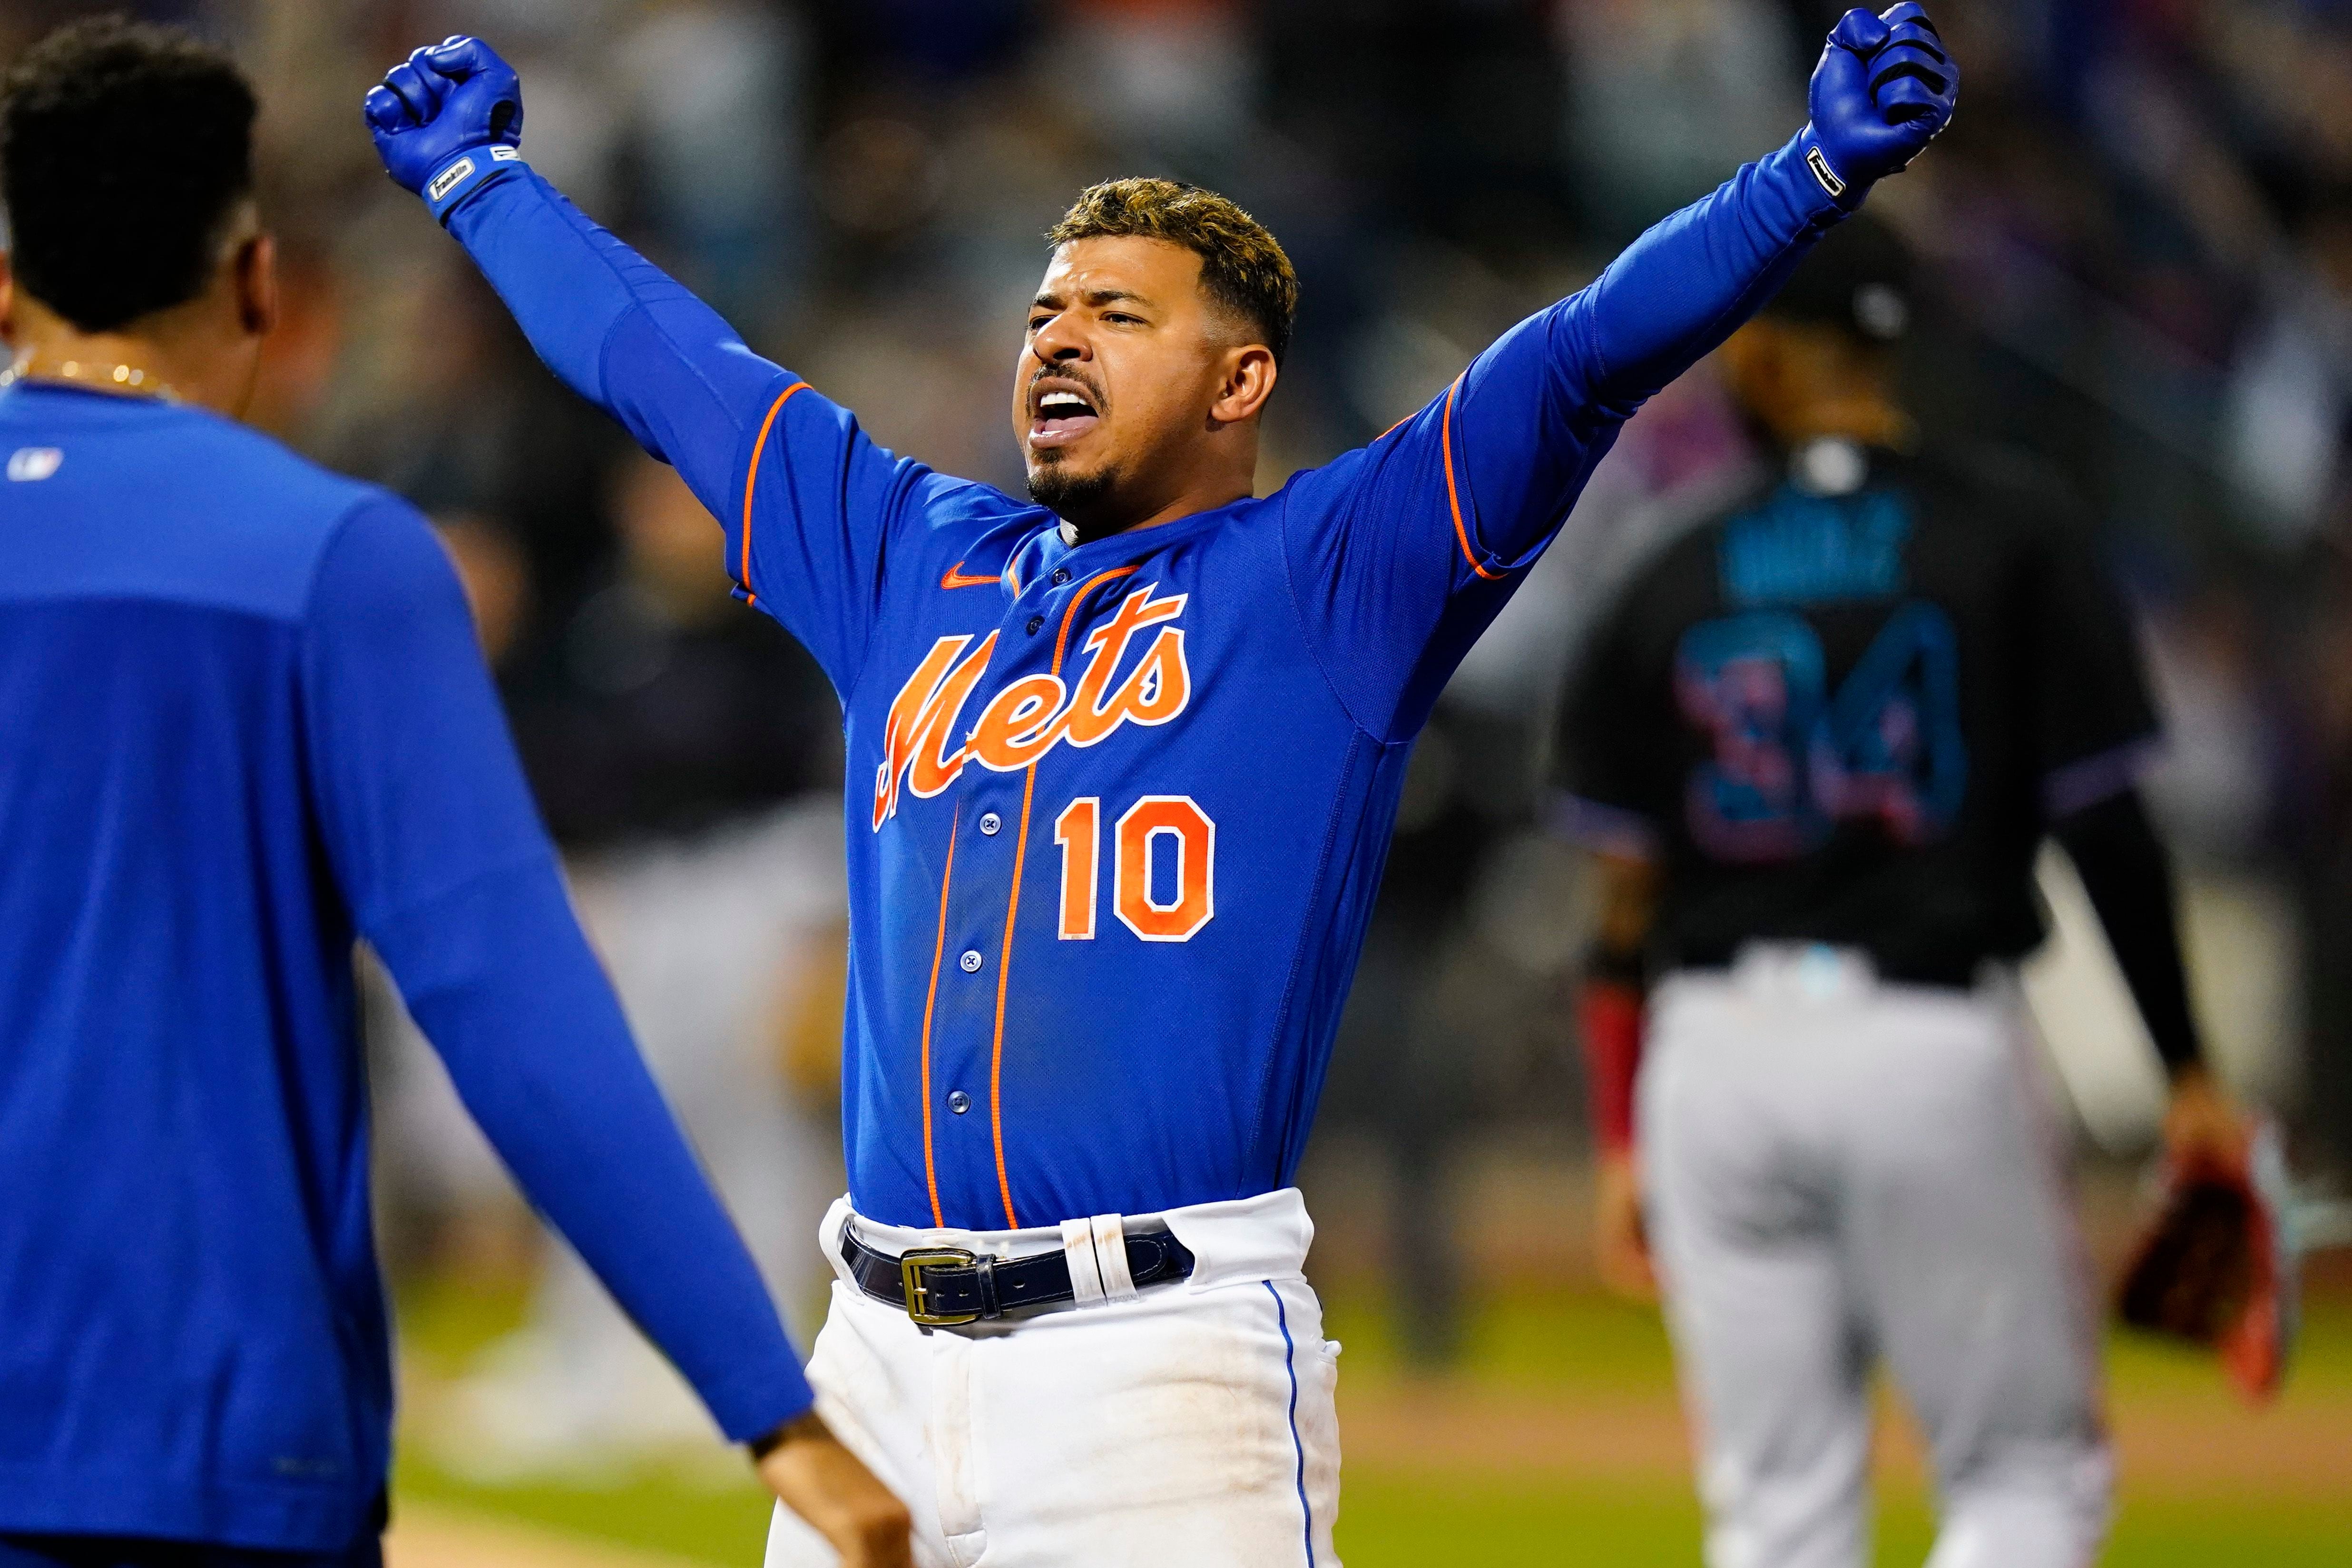 Fried, Harris lead Braves over deGrom, Mets to win series - The